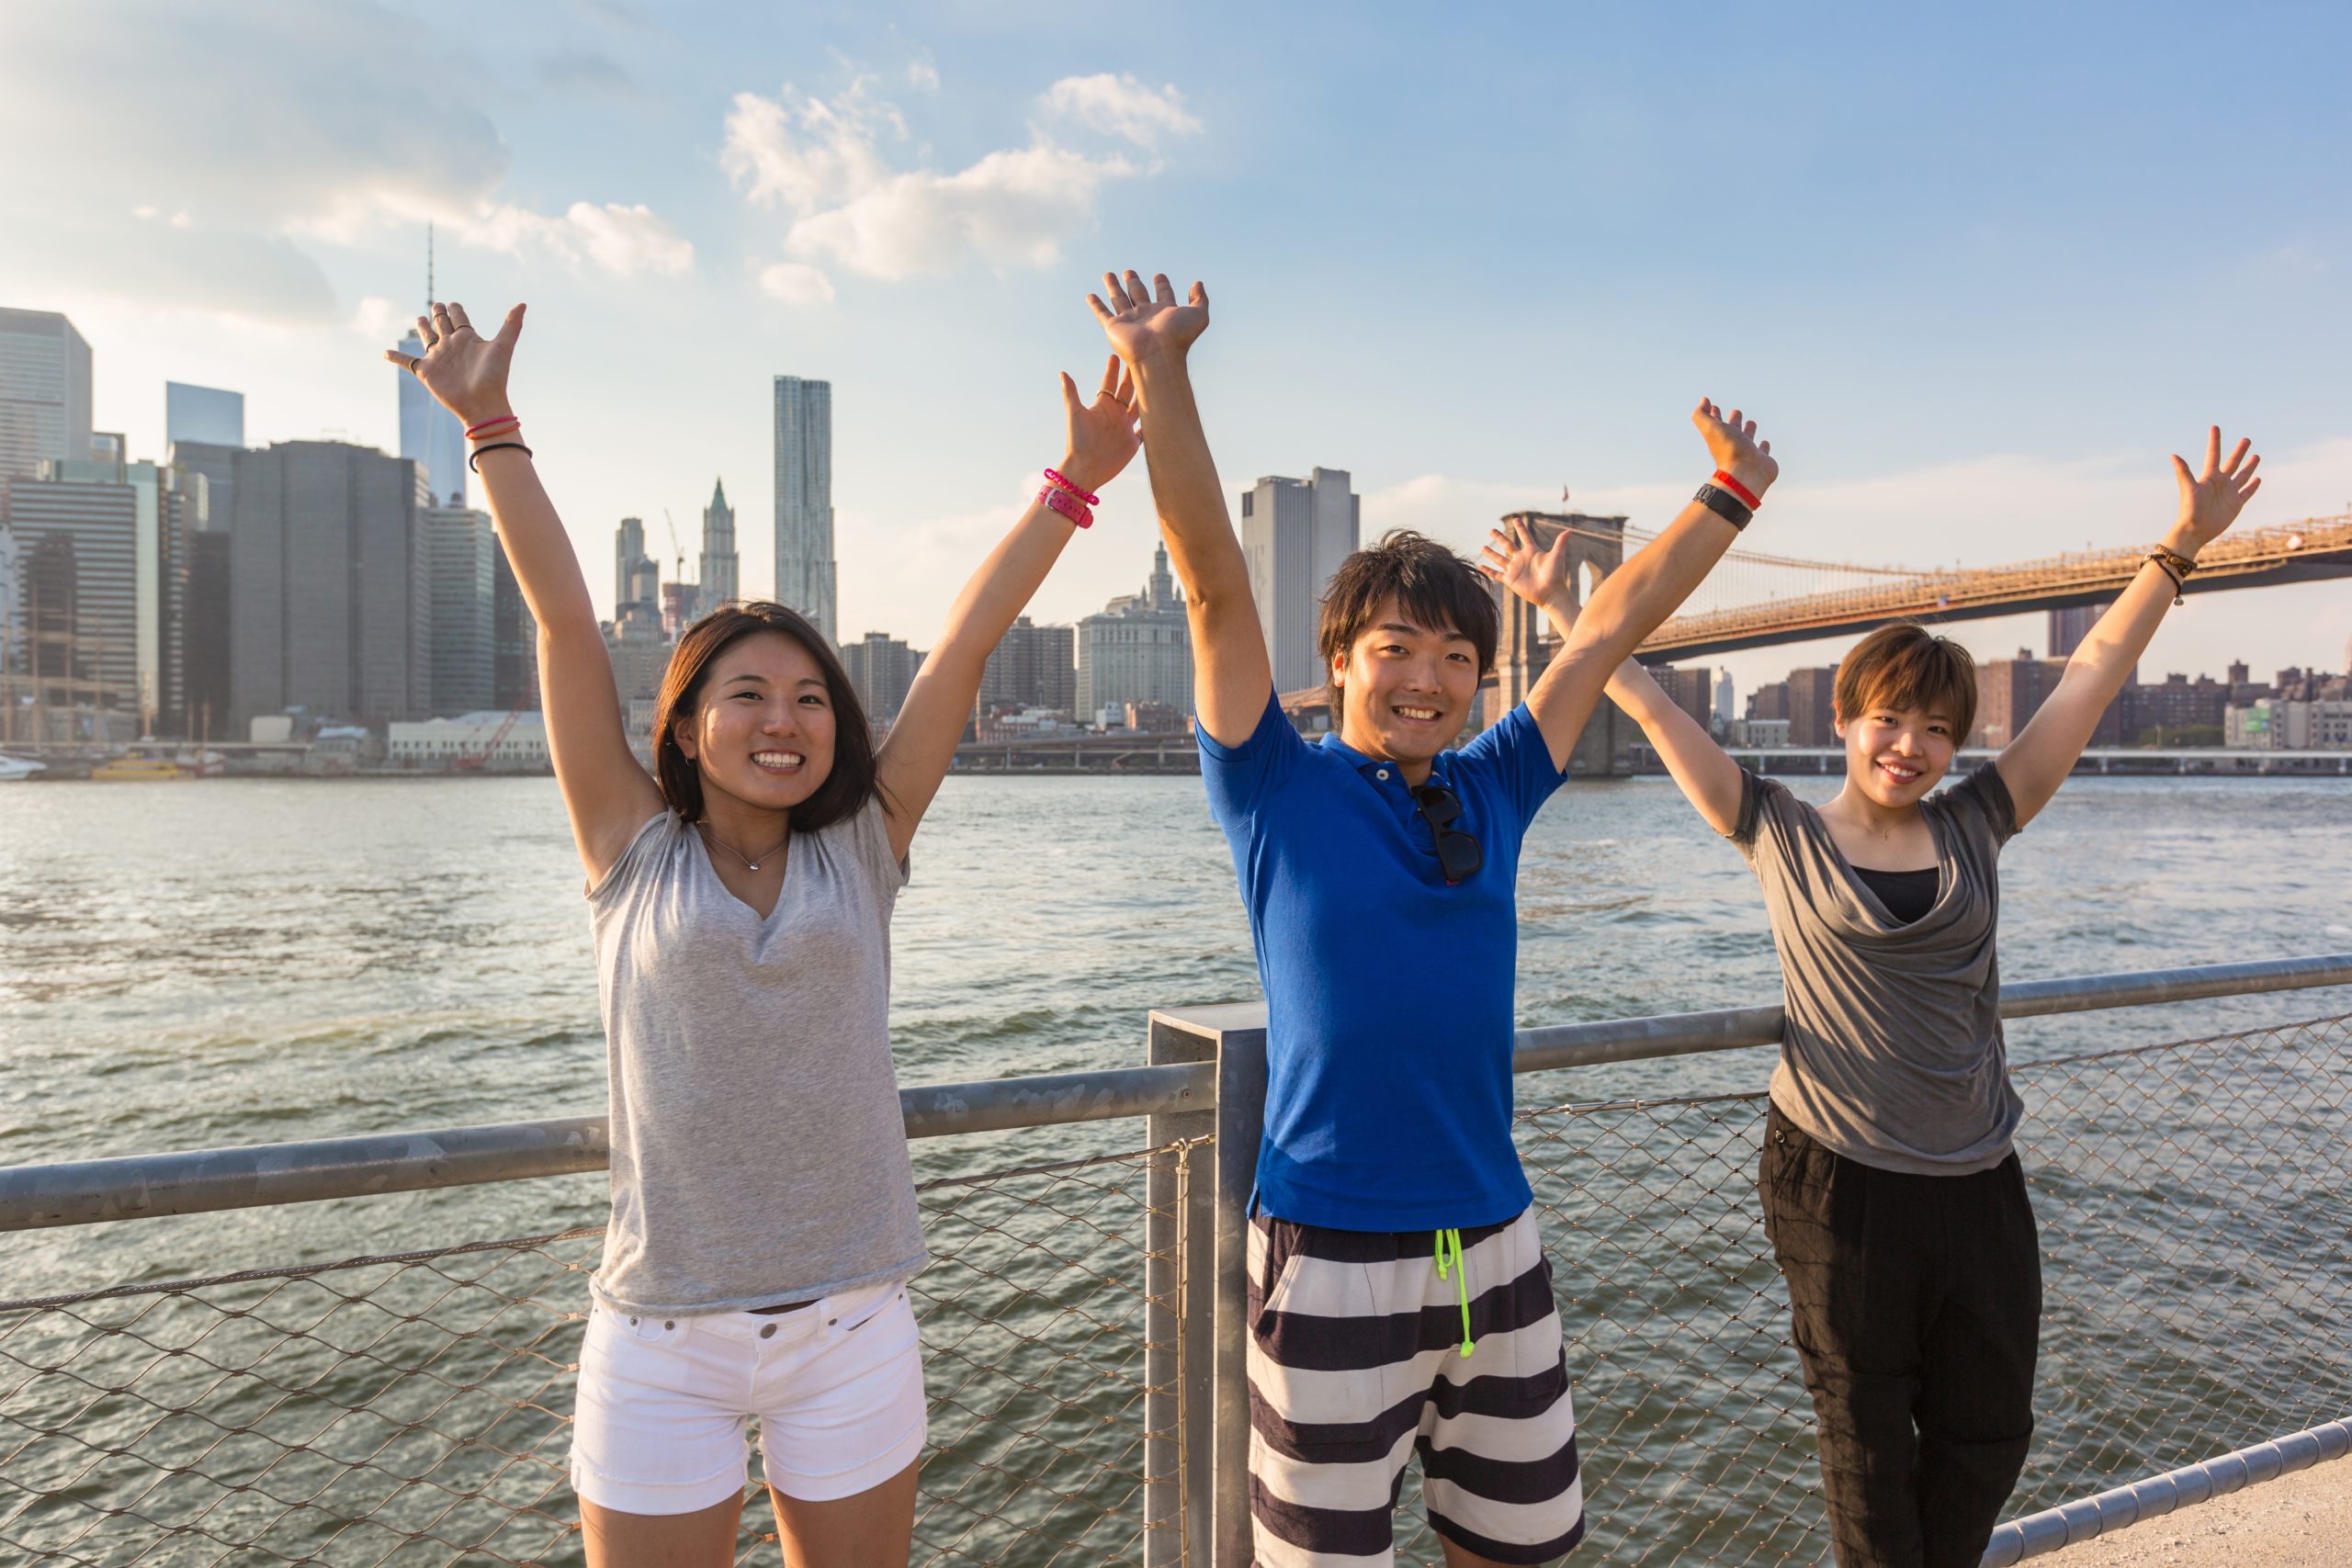 Students with hands in the air in front of the NYC skyline